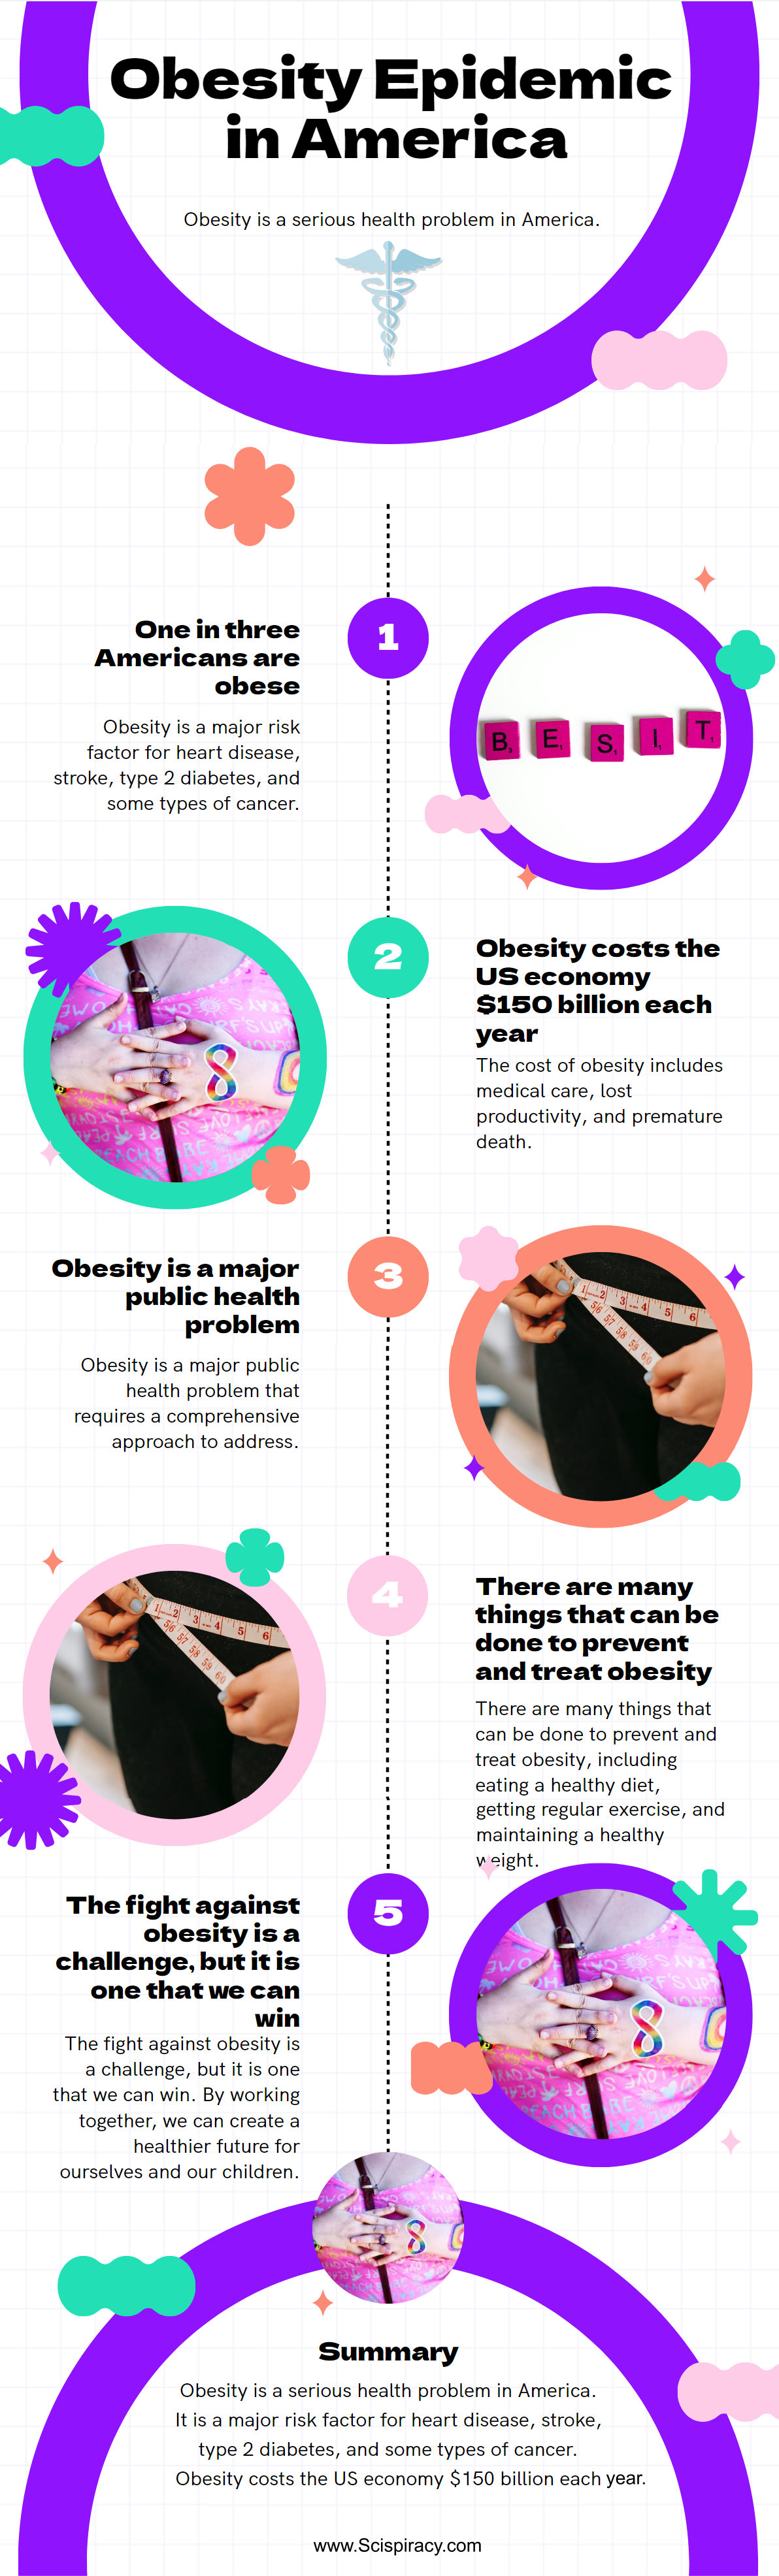 An infographic with various reasons for obesity in America.